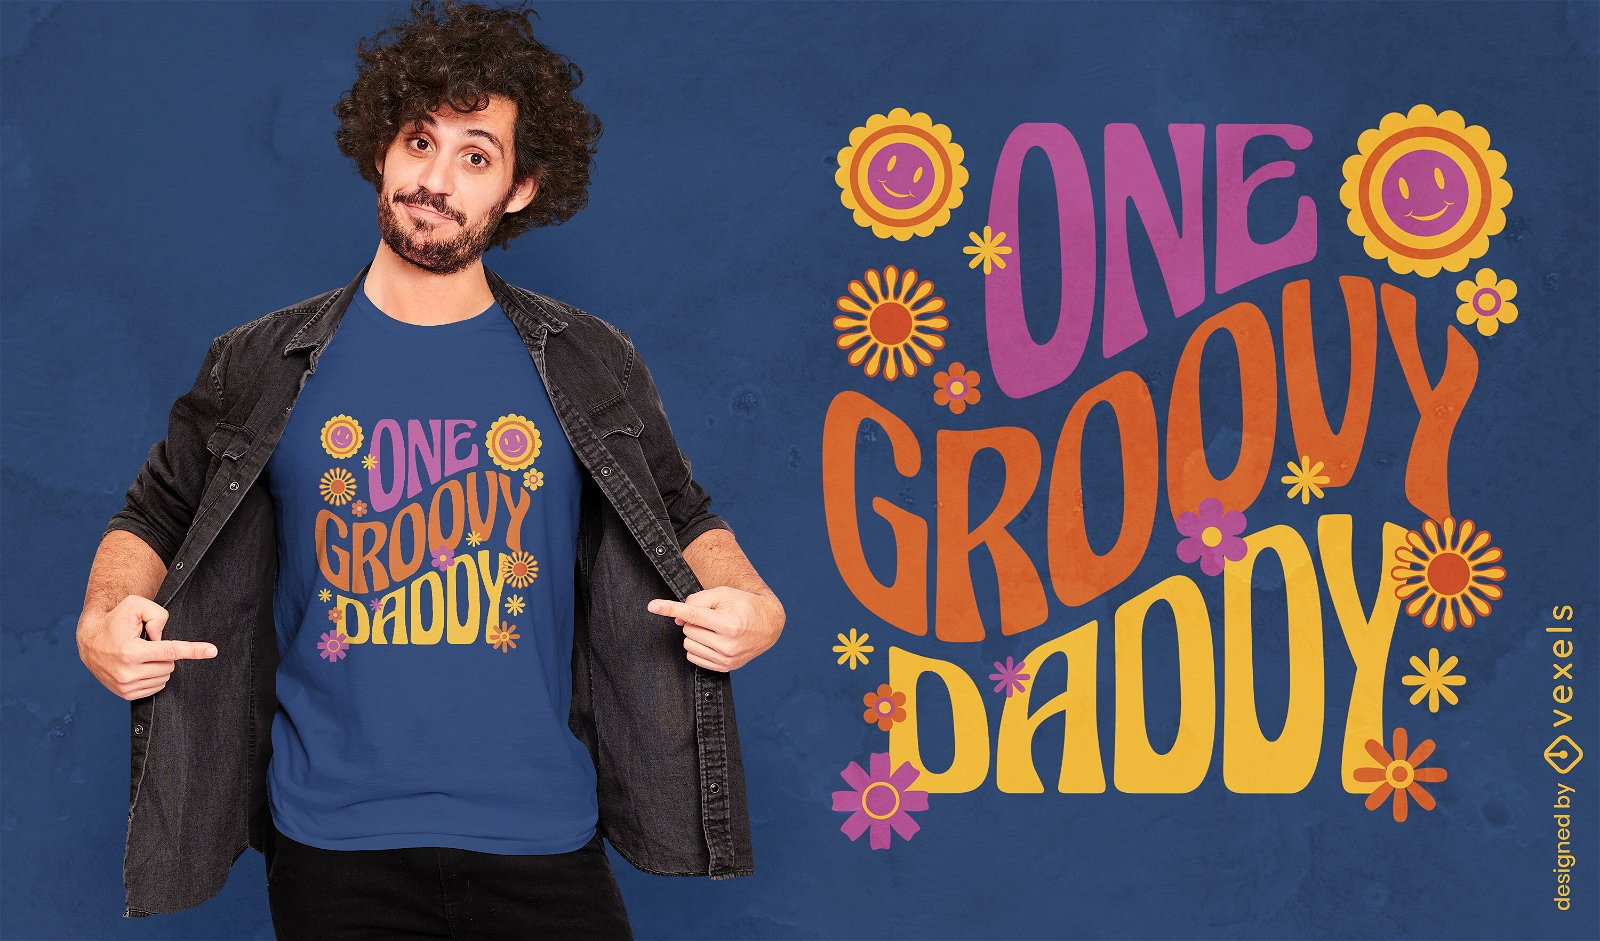 Groovy and hippie quote t-shirt design